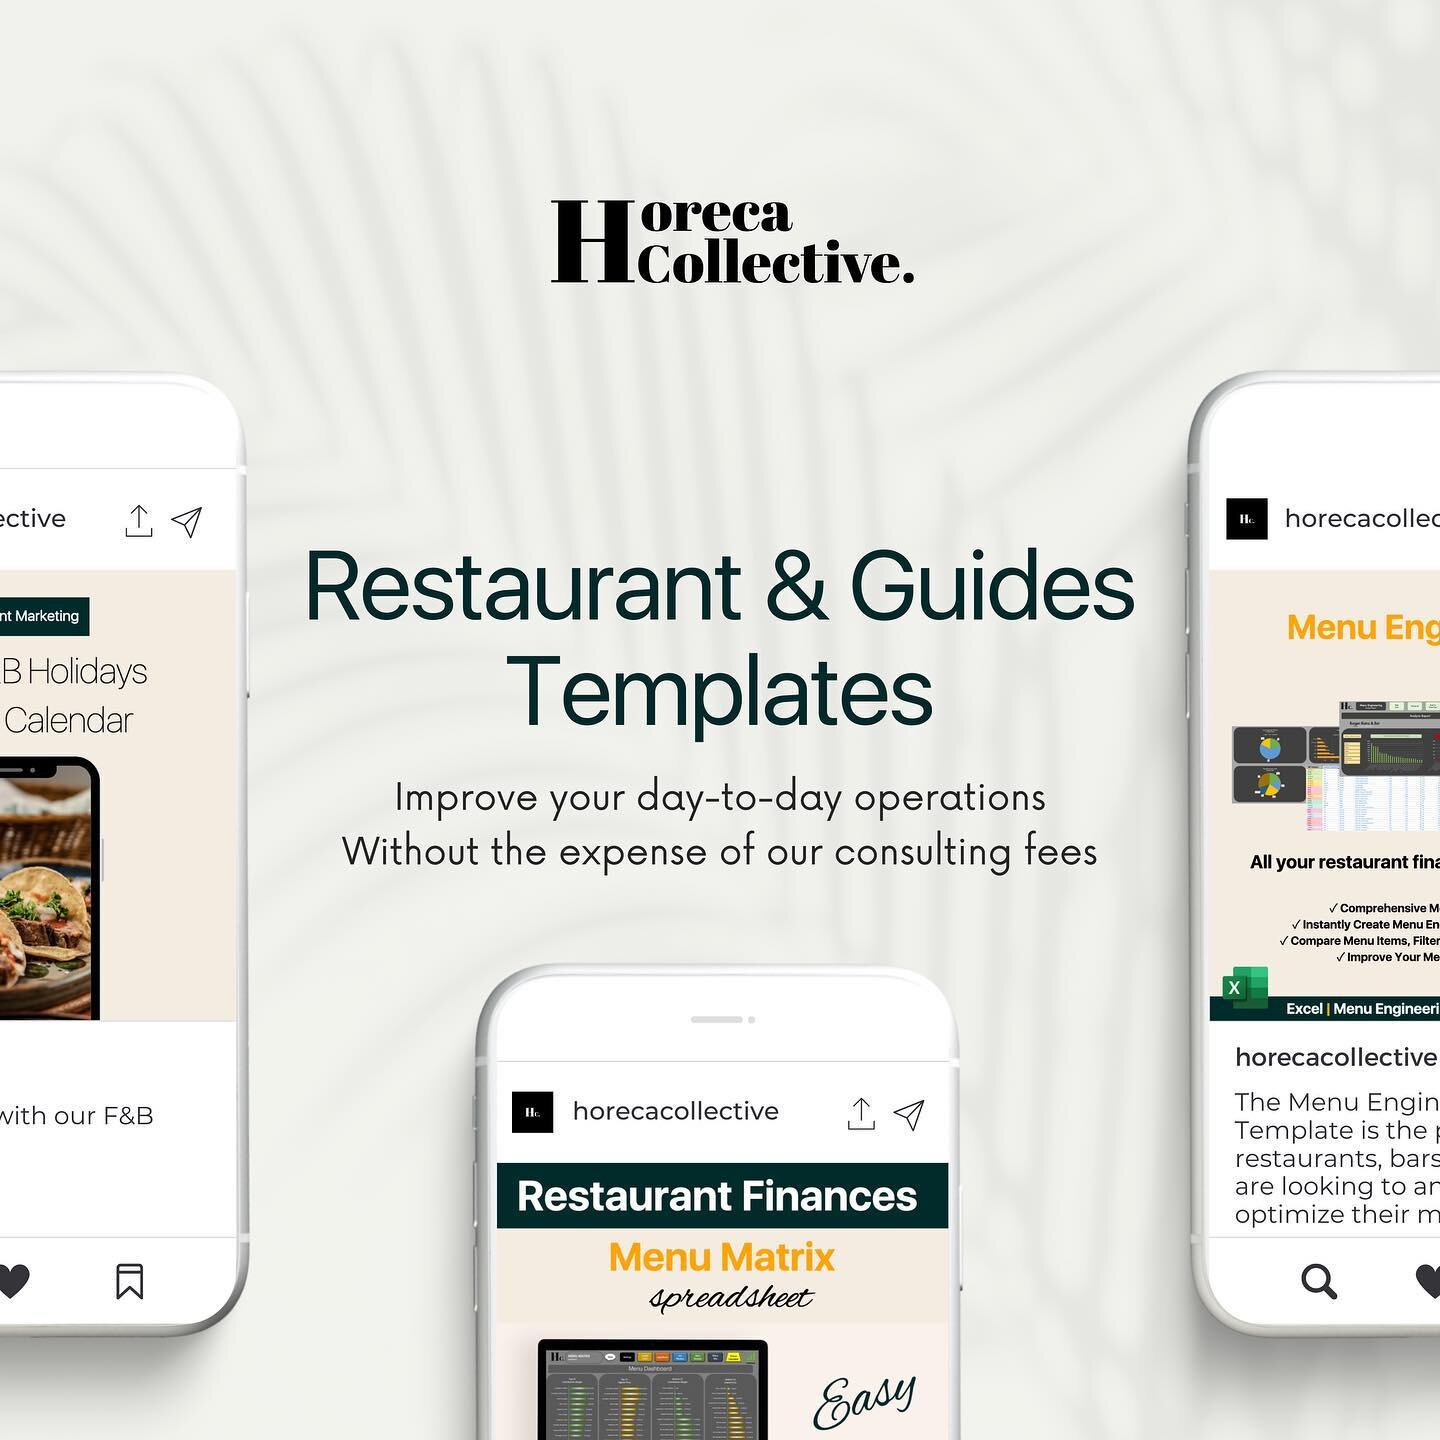 Improve your daily operations without the expense of consulting fees. Head over to our website to find restaurant templates and guides 👏

&mdash;

#restaurantbusiness #reels #marketing #brandawareness #customers #foodmarketing #foodie #restauranttip